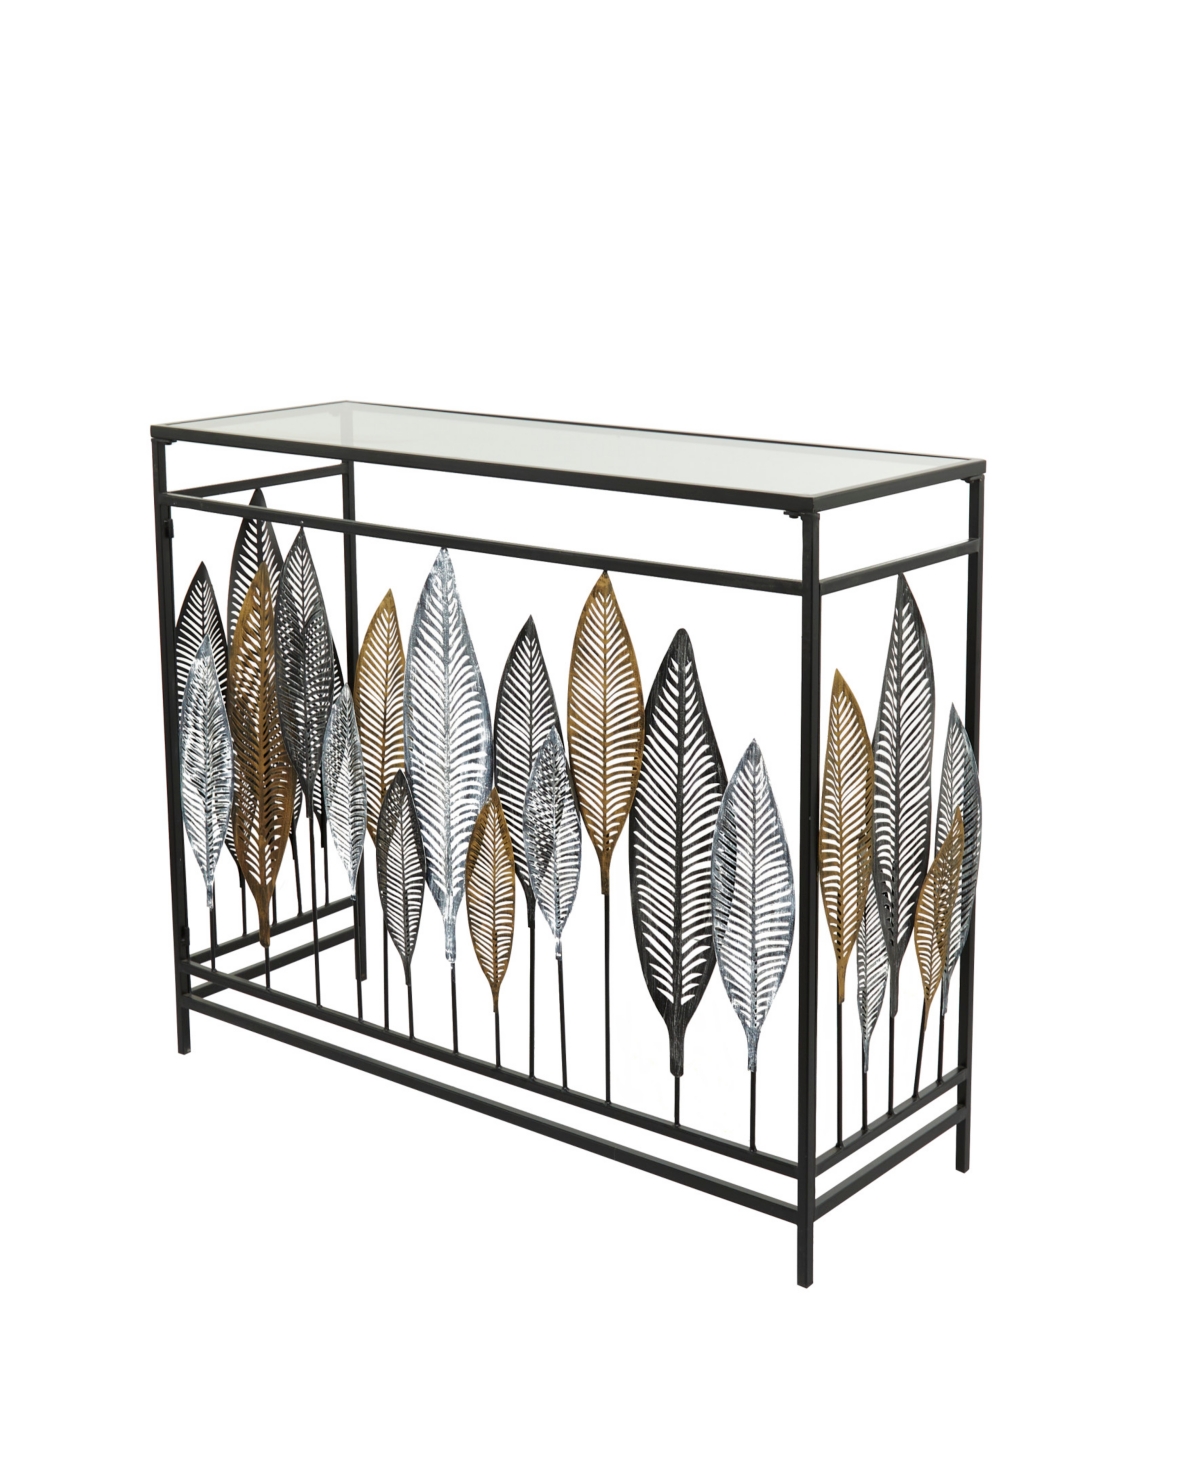 Rosemary Lane Metal Contemporary Console Table With Mirrored Glass Top, 44" X 16" X 30" In Black